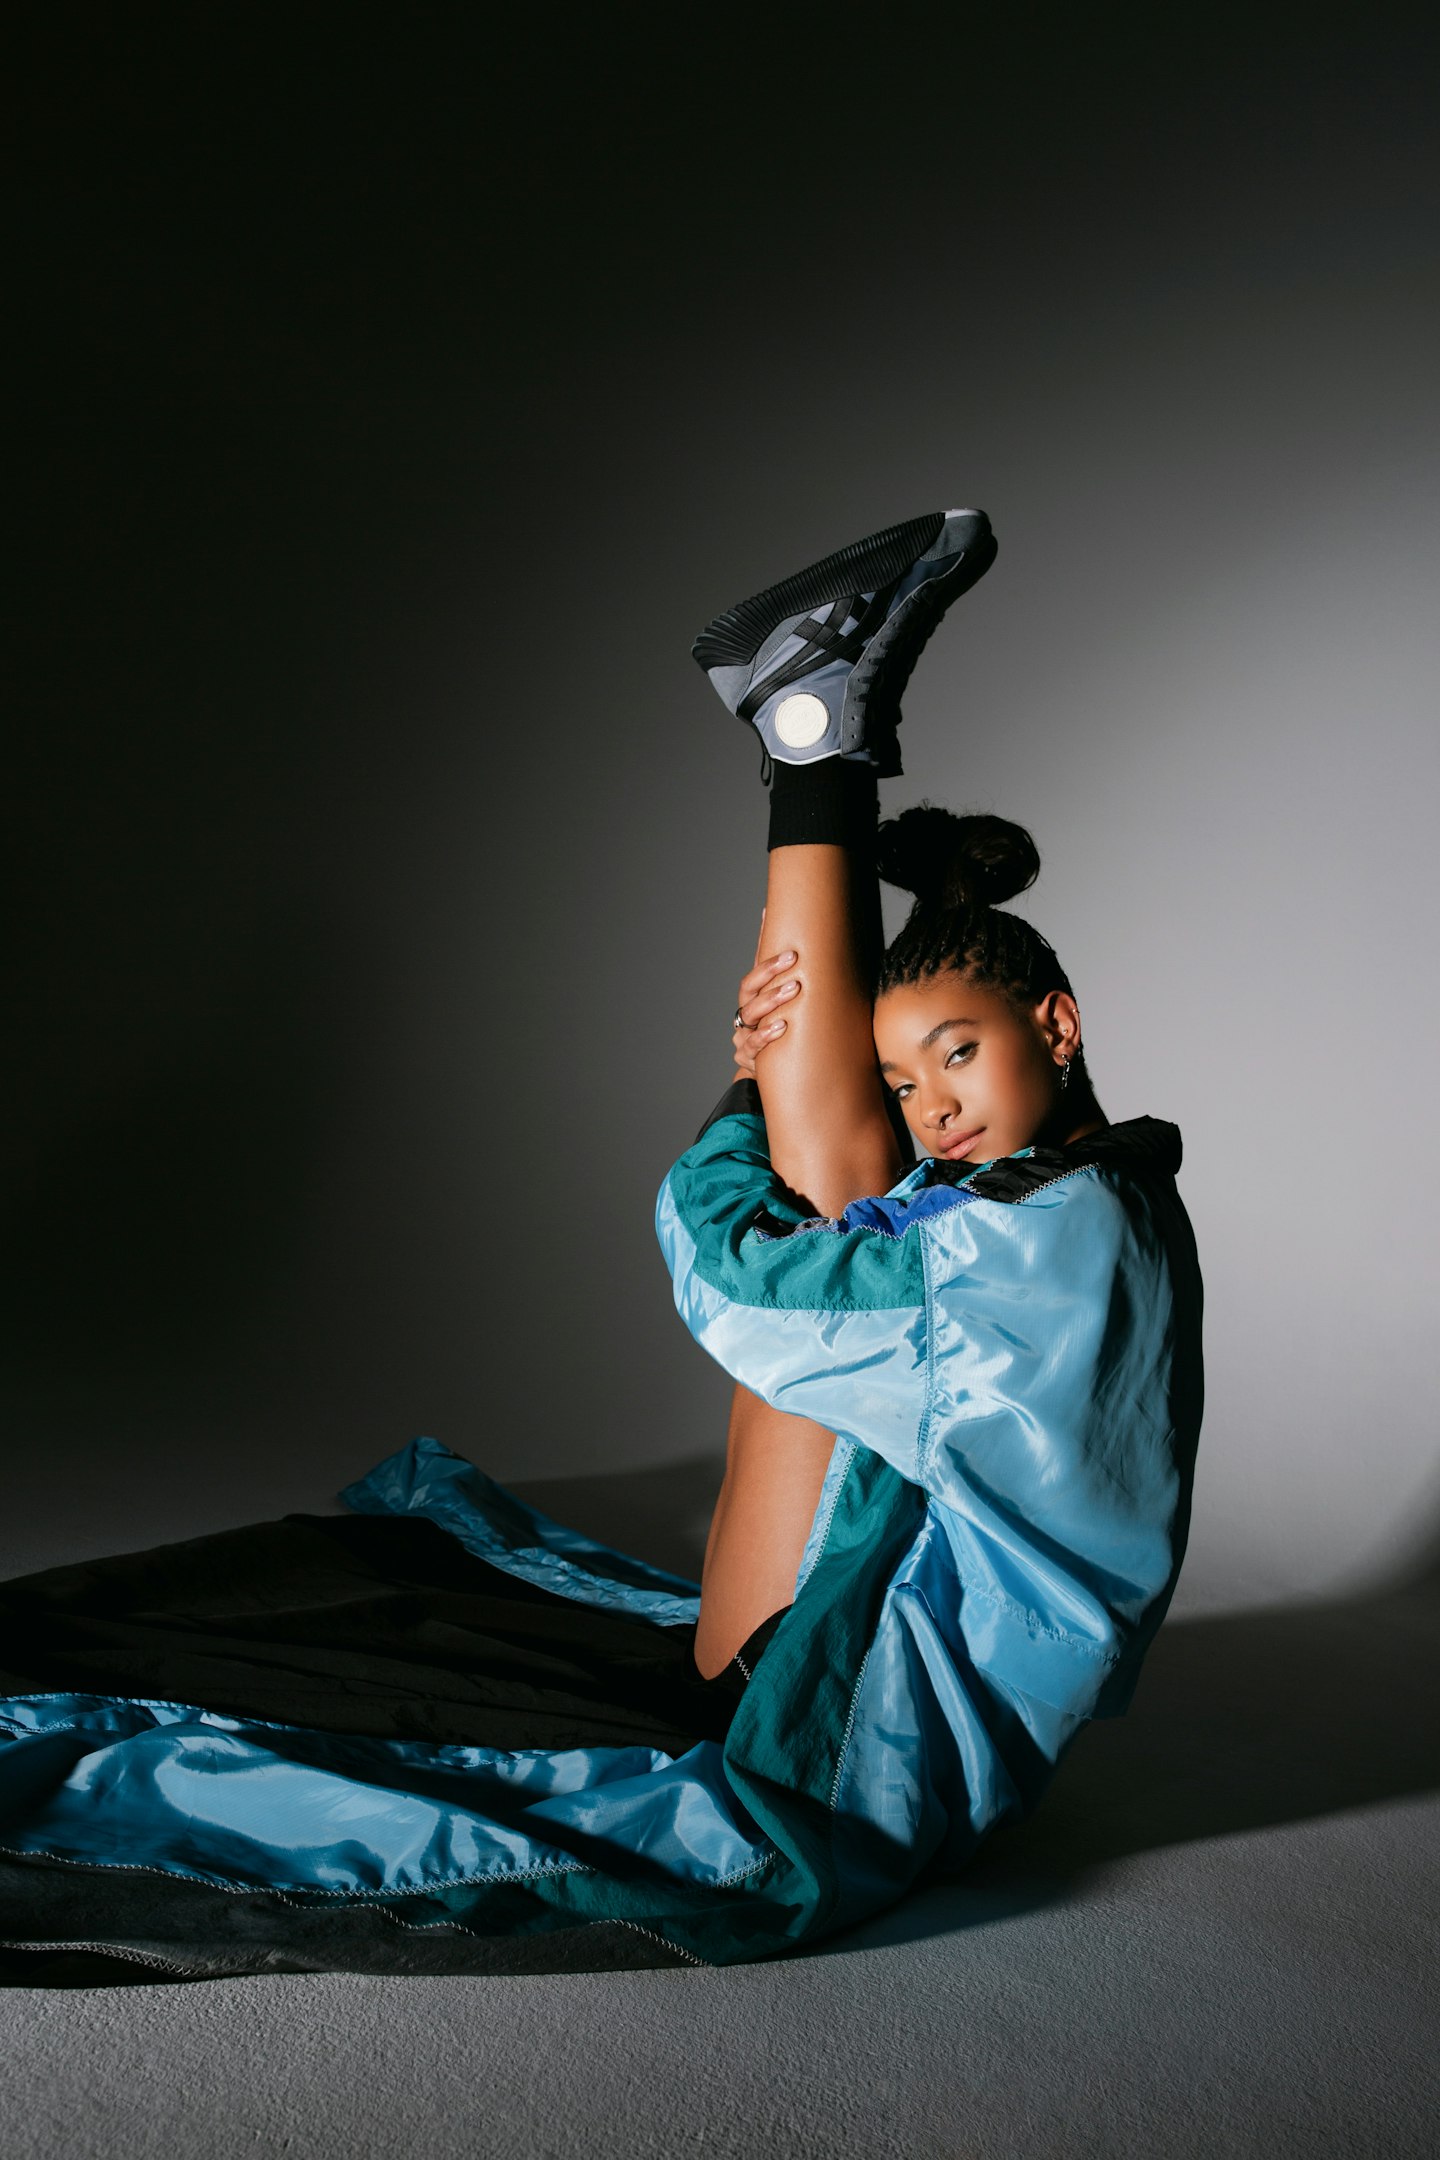 Willow Smith wearing a blue coat from Onitsuka Tiger